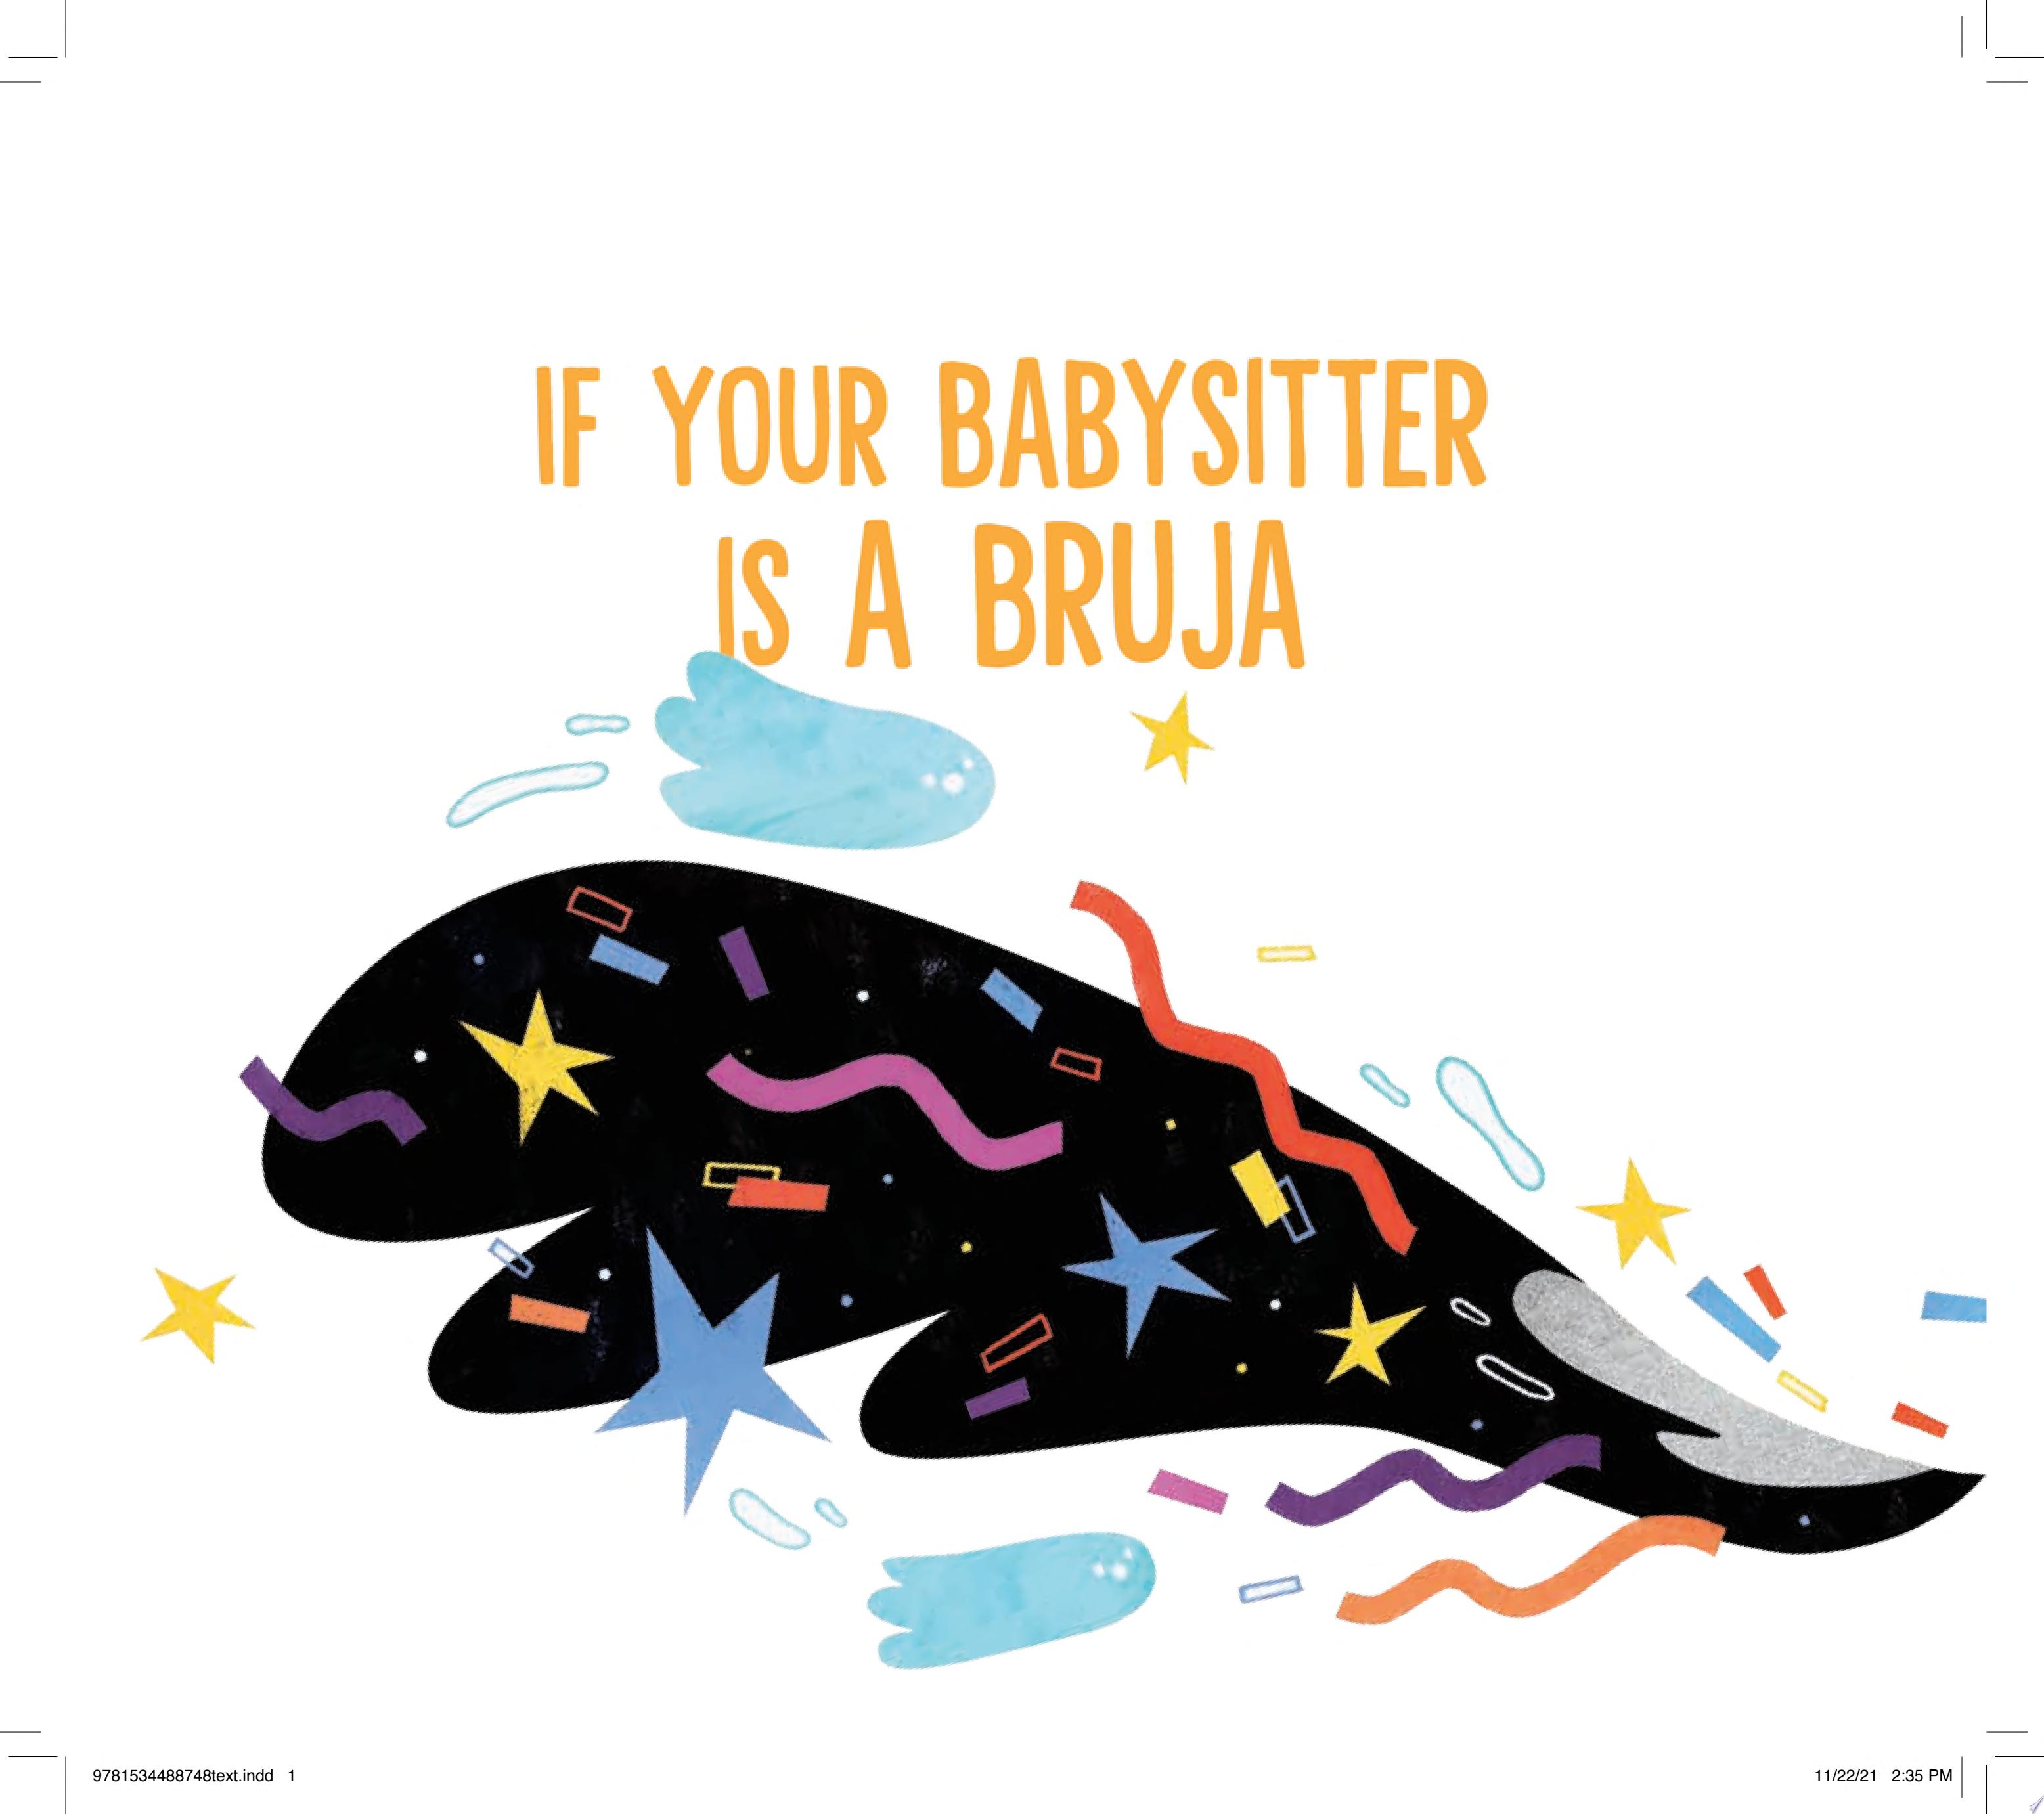 Image for "If Your Babysitter Is a Bruja"